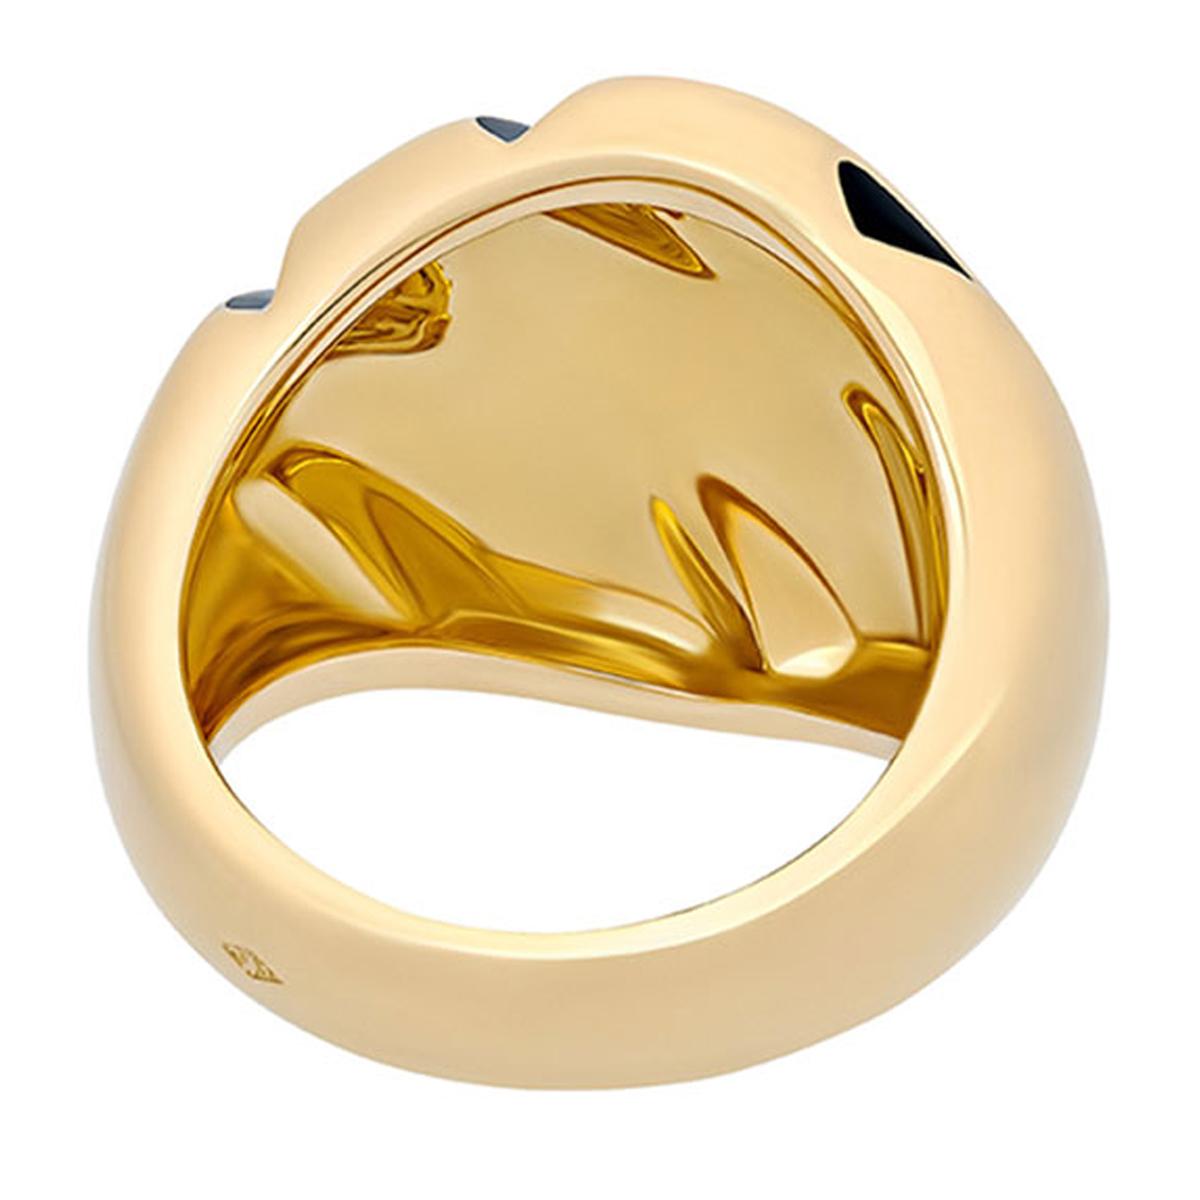 An iconic Cartier panthere yellow gold ring showcasing a panthere claw set with black enamel in 18k yellow gold. The ring measures a size 6 1/2 and can be resized.